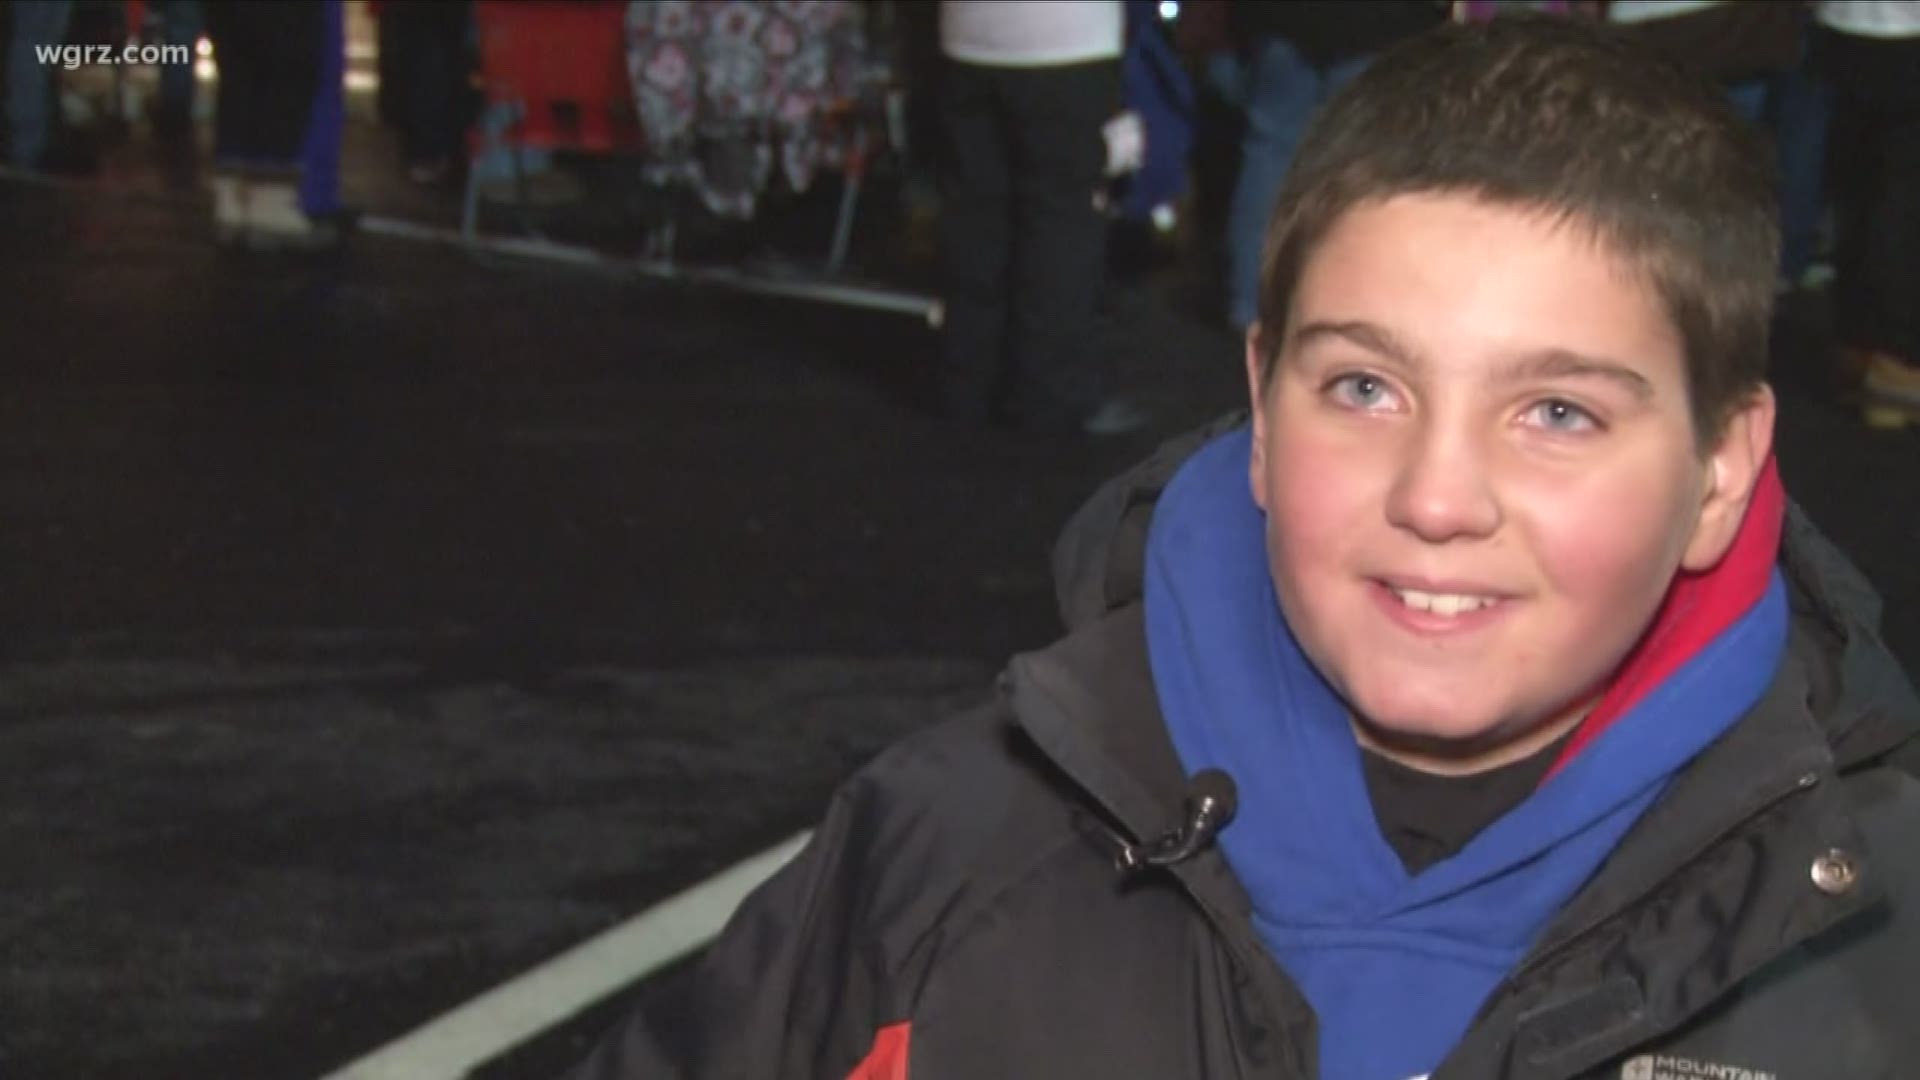 Sam's interview with WGRZ becomes viral video